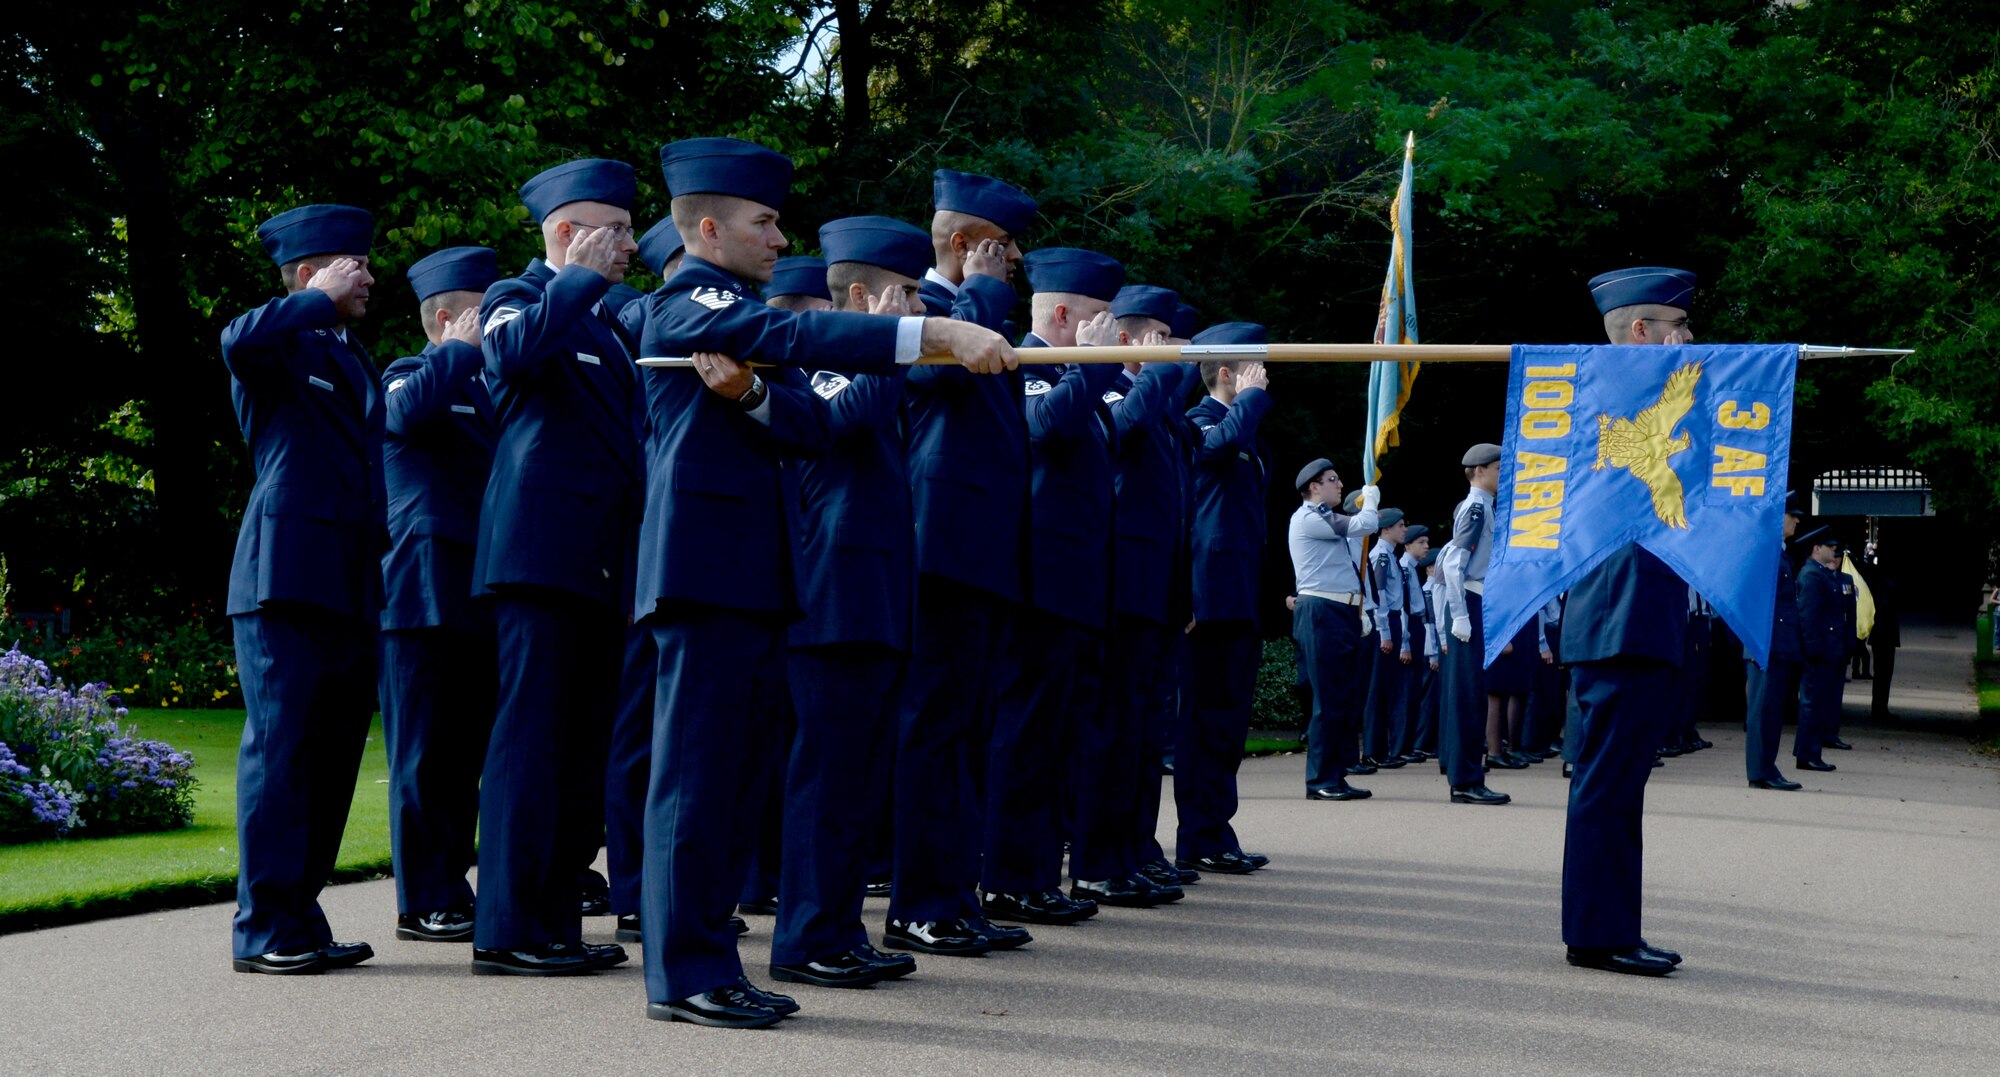 U.S. Air Force Airmen from RAF Mildenhall participate in the Battle of Britain parade Sept. 19, 2016, in Bury St. Edmunds, England. The annual parade, held on the Sunday falling closest to Sept. 15 – Battle of Britain Day – ended with a salute in the Abbey Gardens. (U.S. Air Force photo by Airman 1st Class Tenley Long)